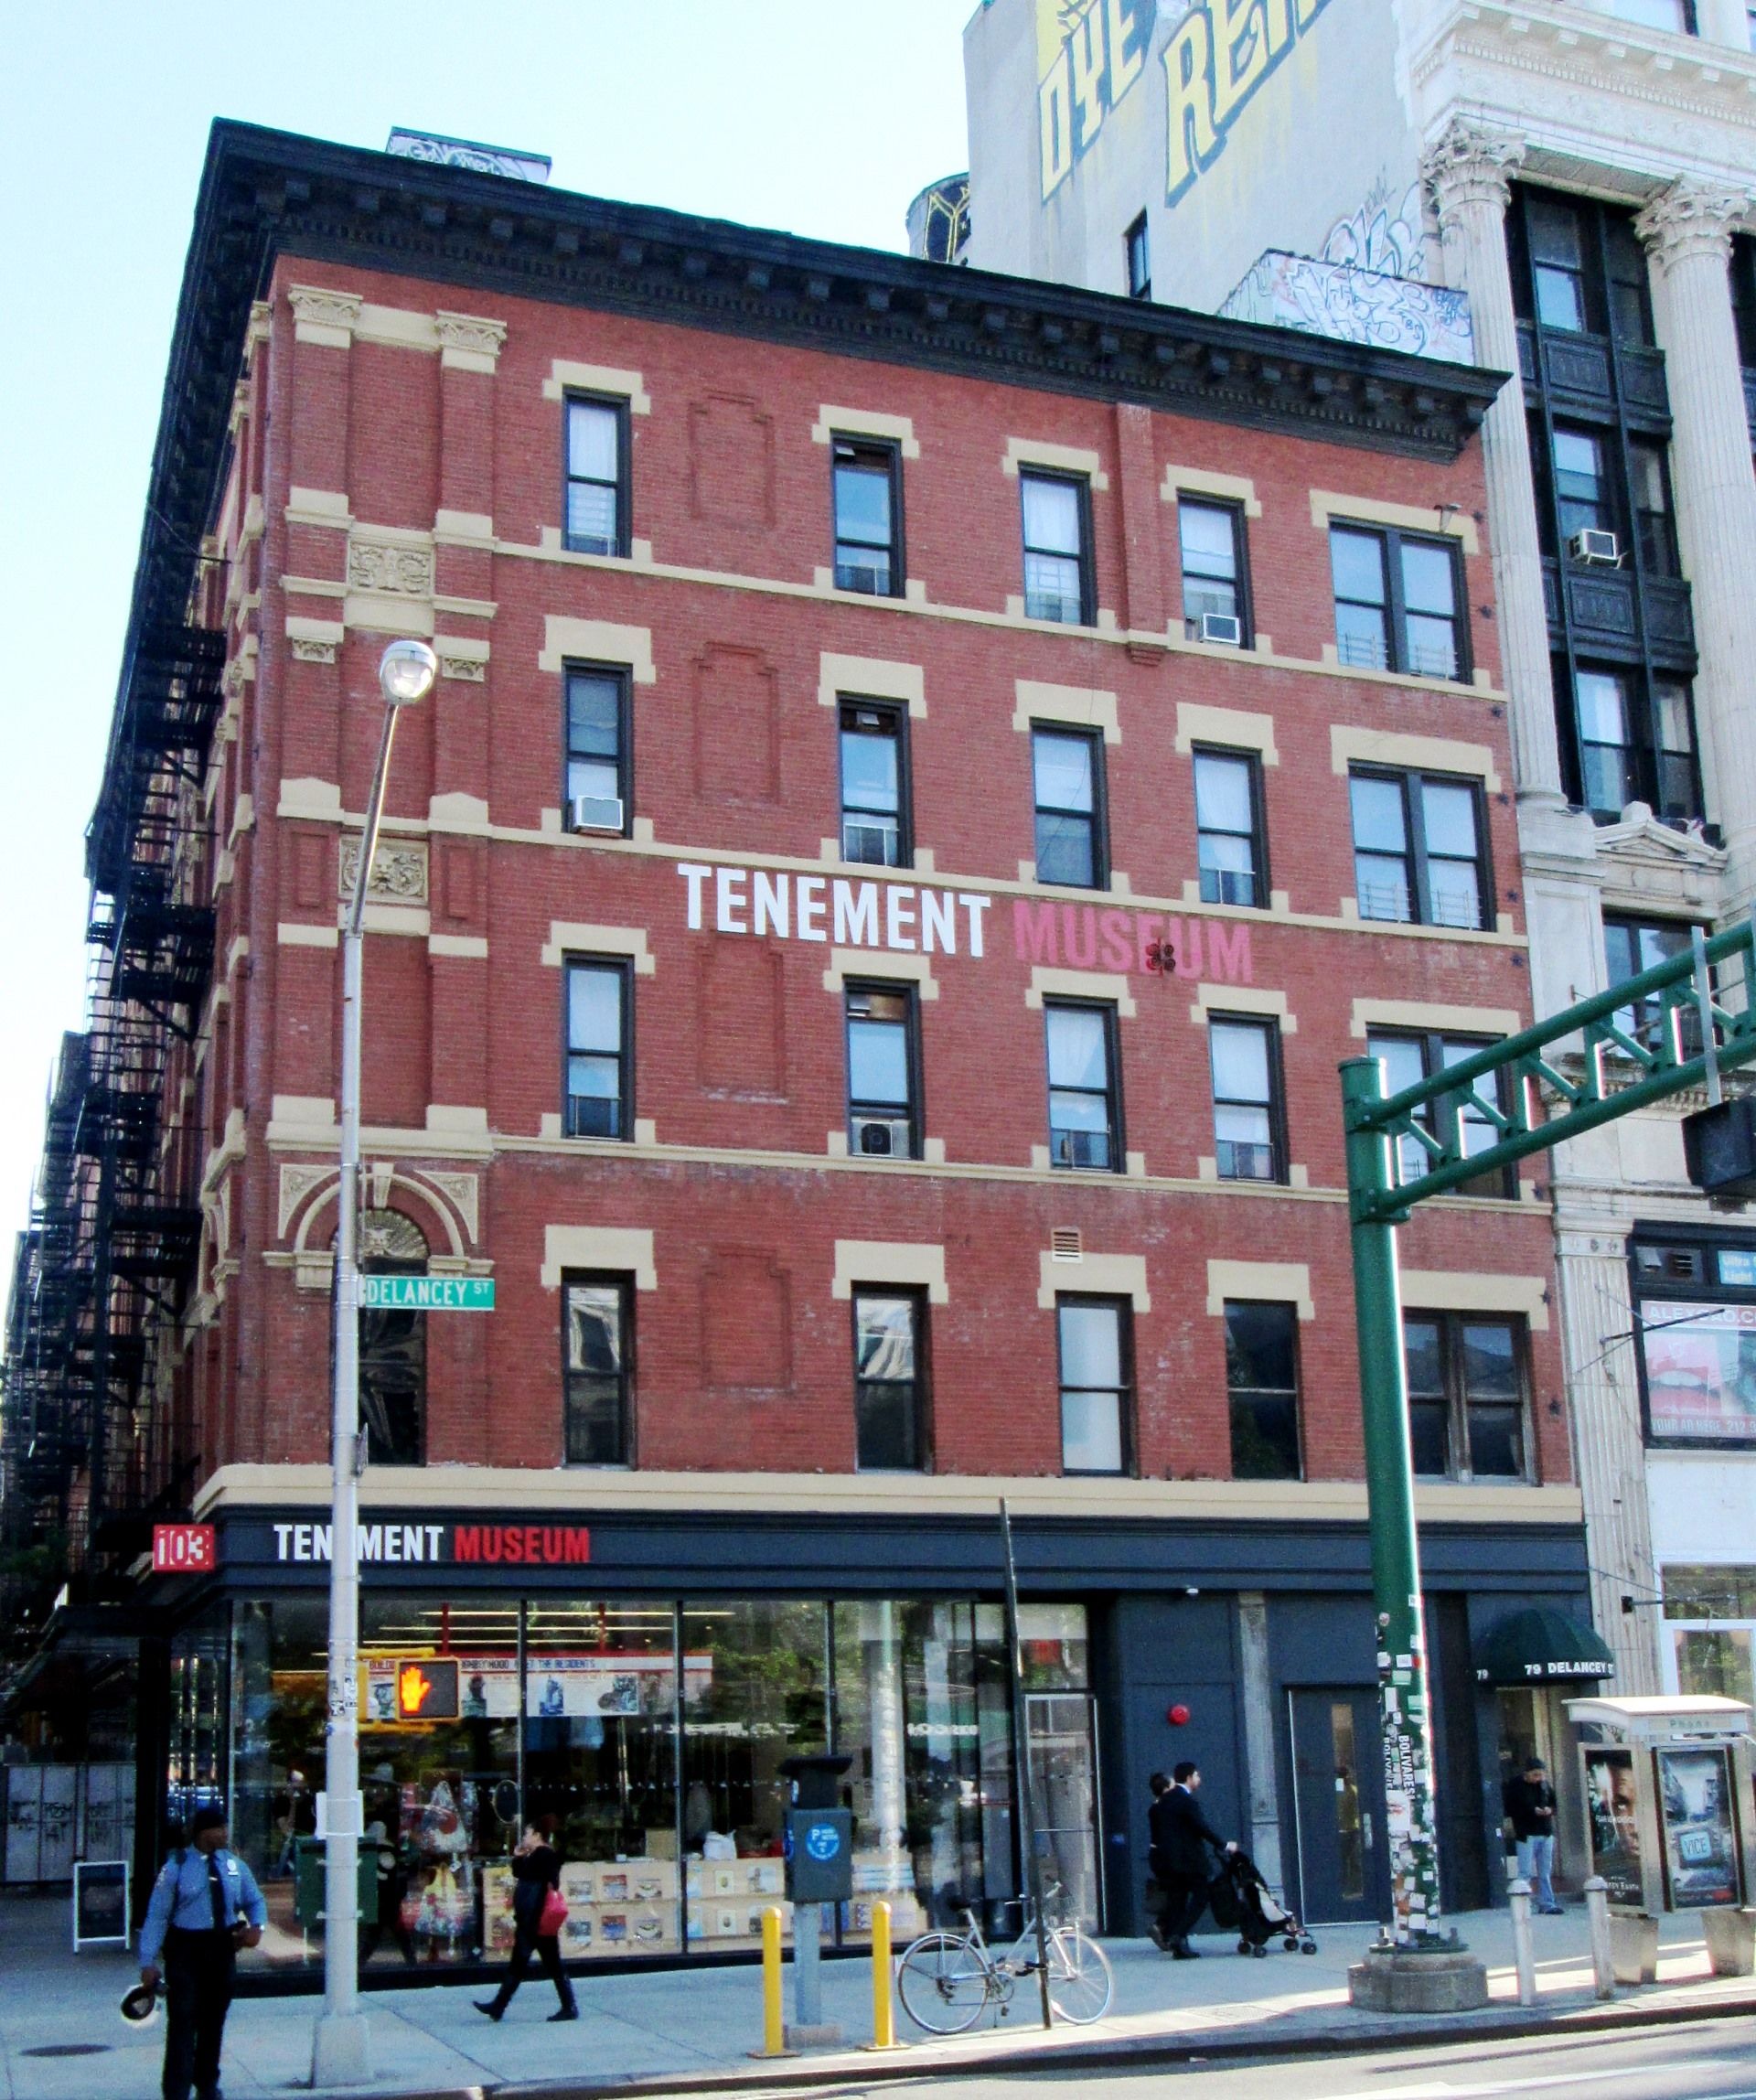 The Tenement Museum in New York, which launched an appeal at its website appealing to donors to help it survive 